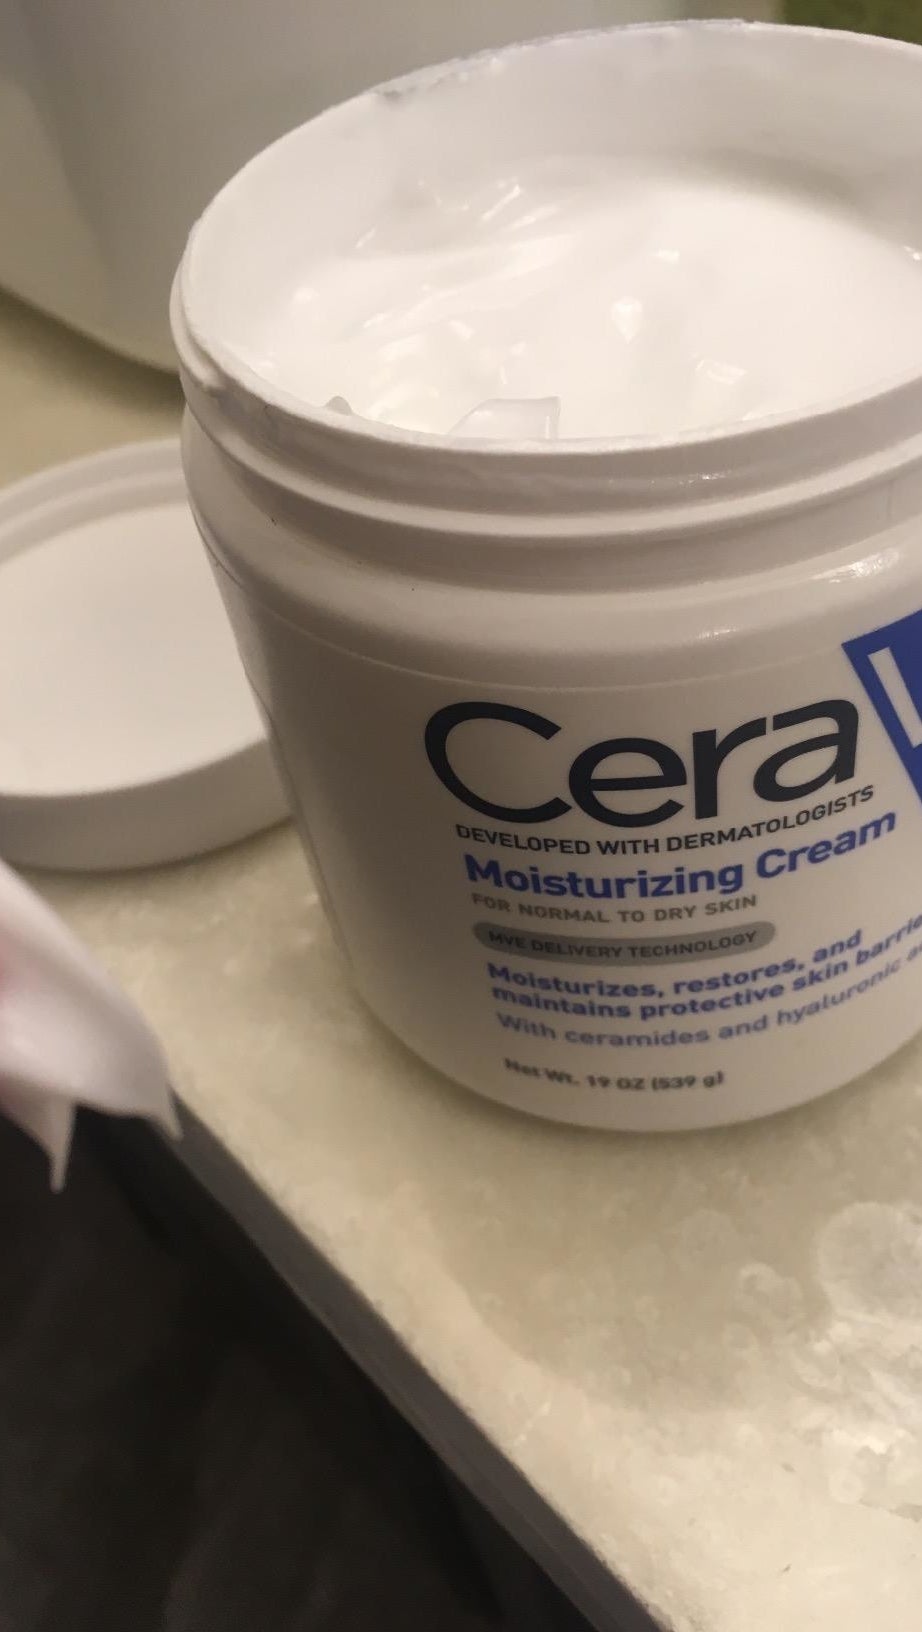 A tub of the moisturizer, which you scoop out with your finger